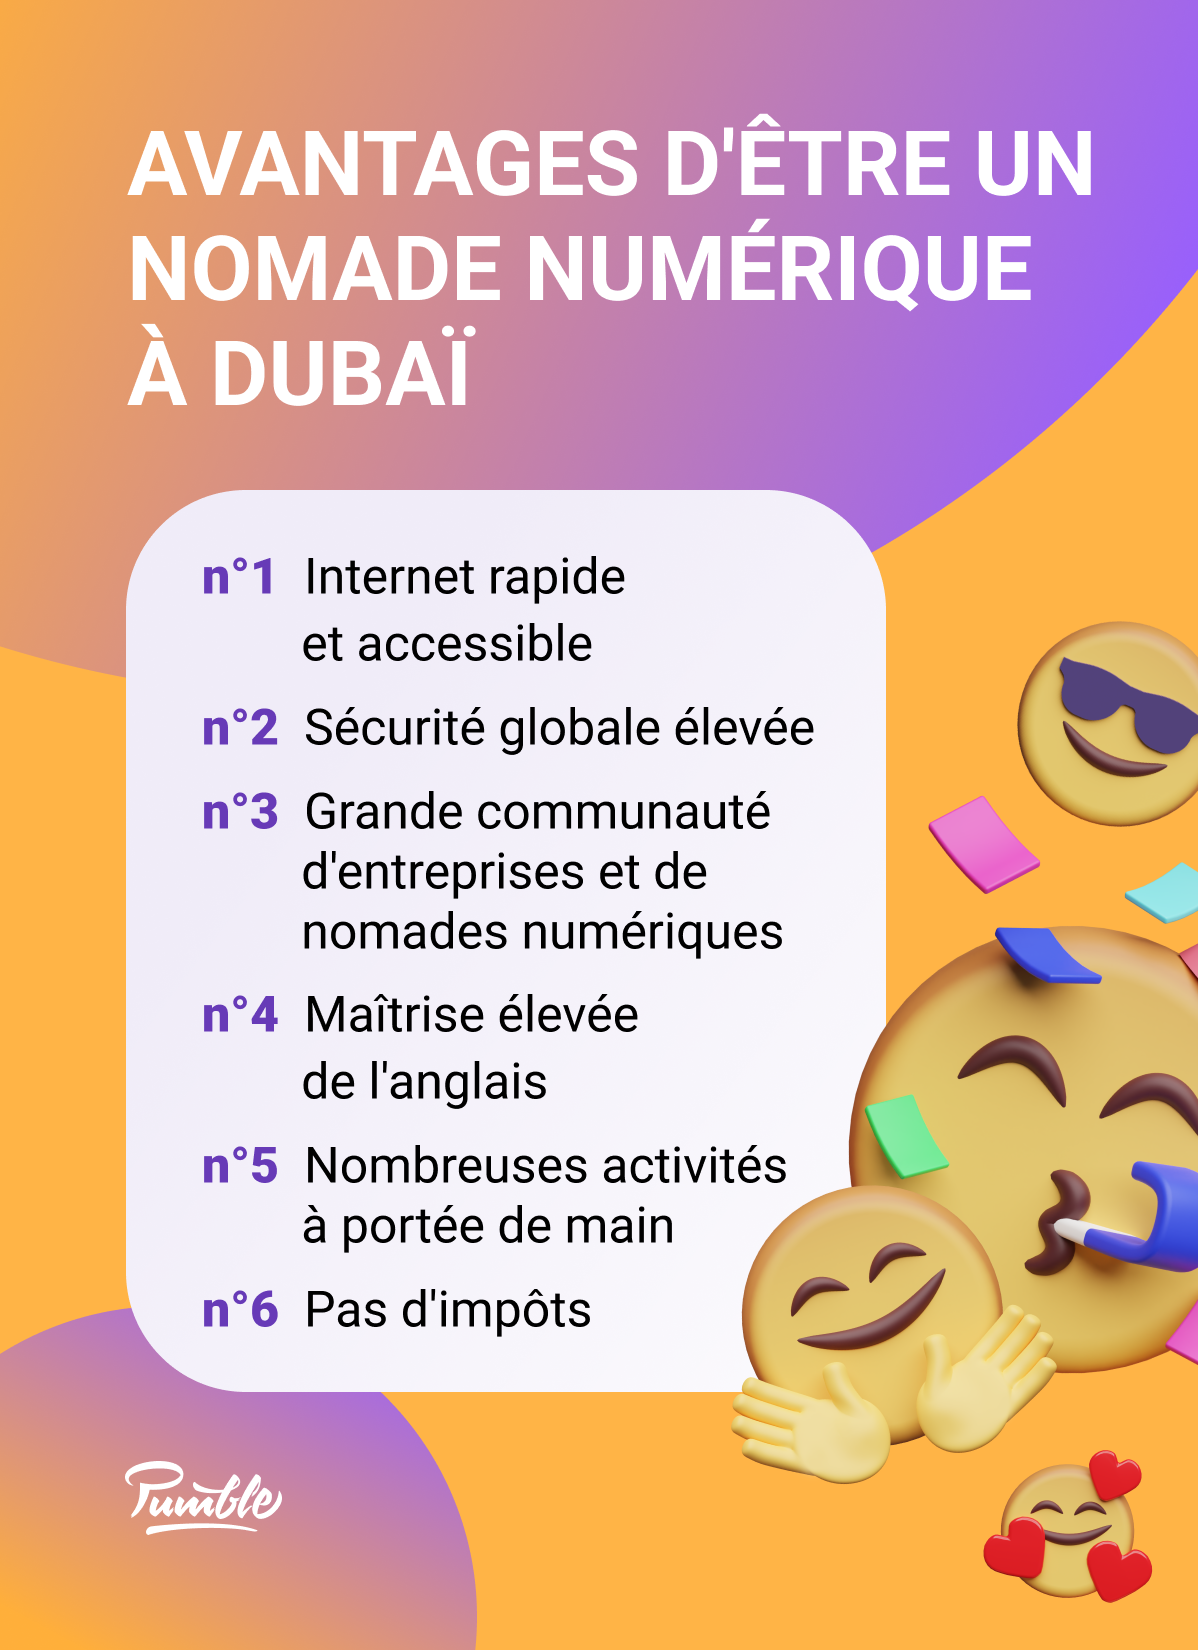 benefits of being a digital nomad in dubai